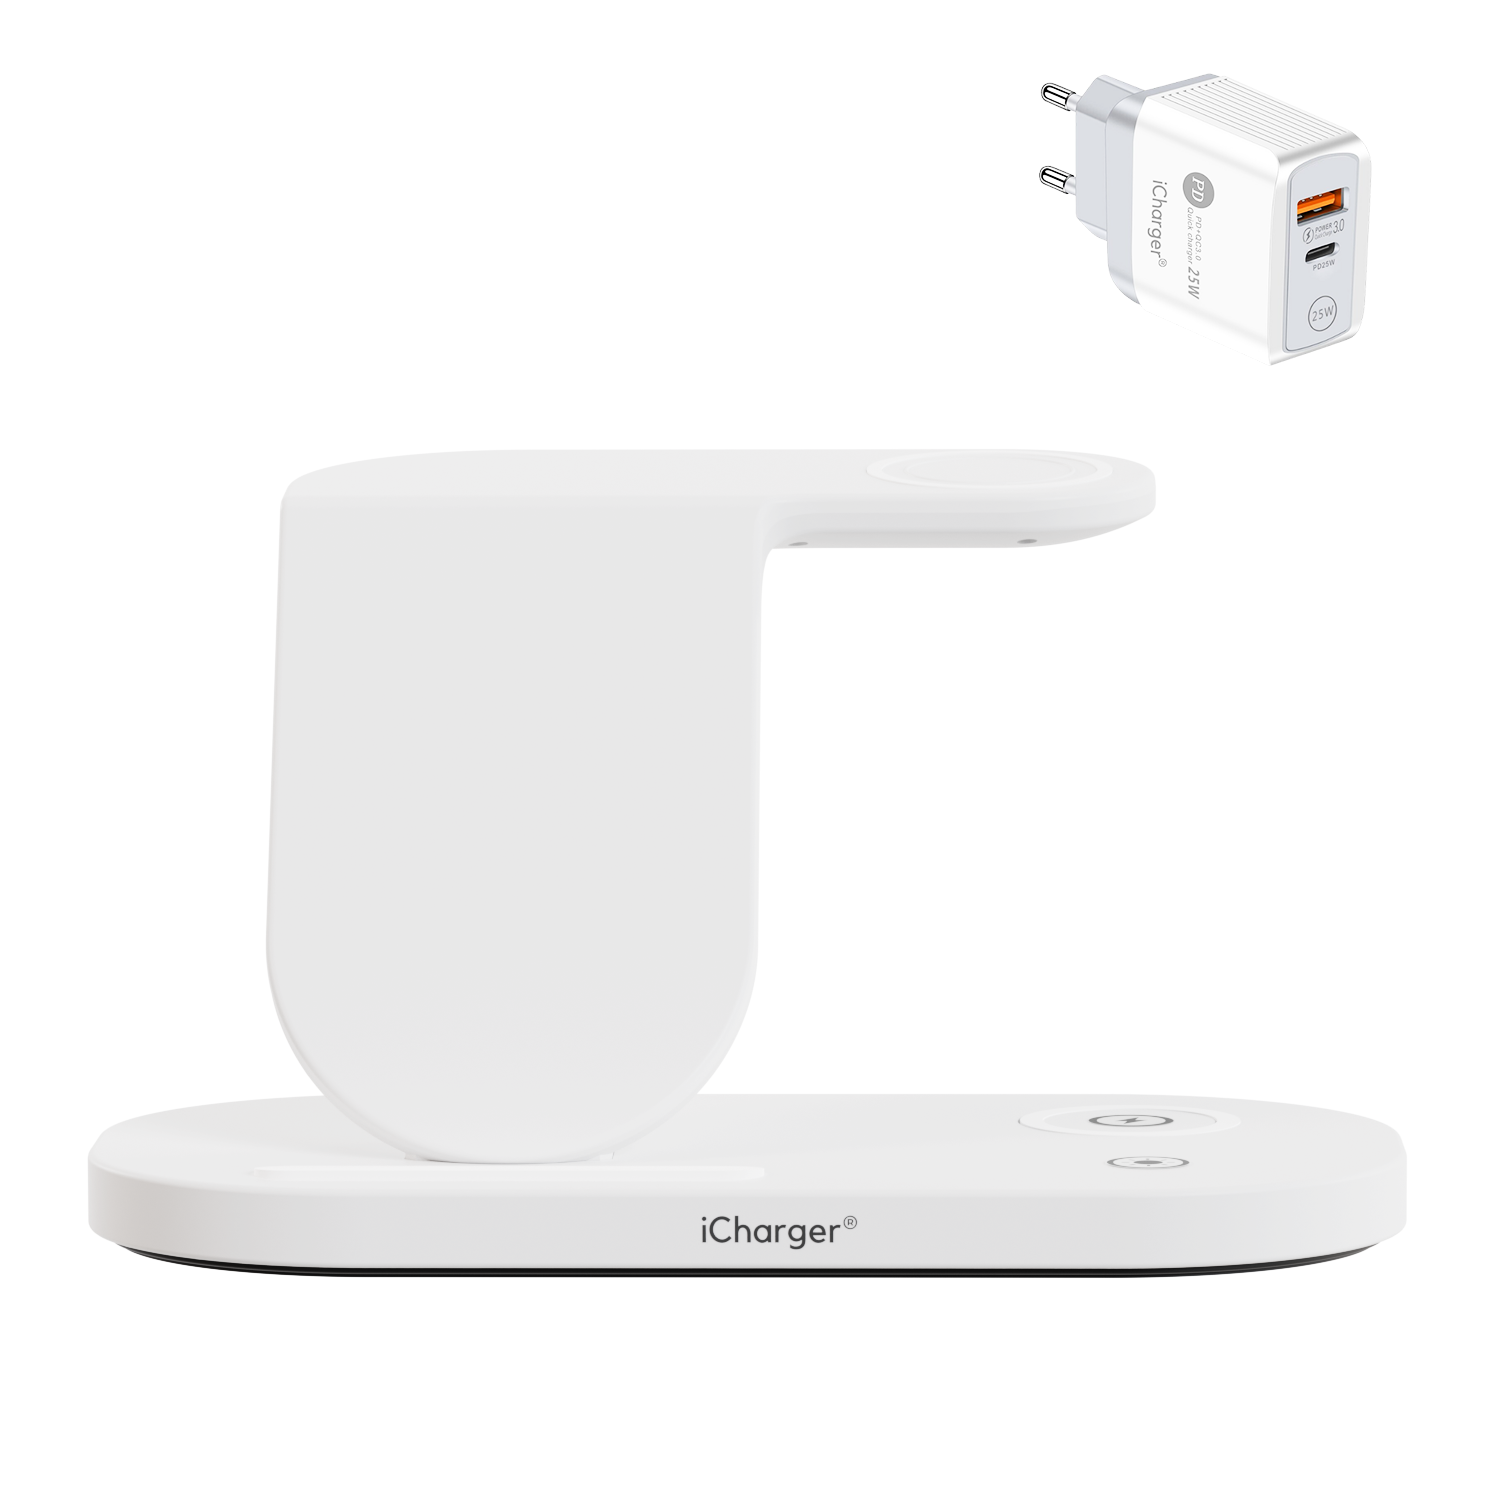 White iCharger Samsungs Pro 3-in-1 sleek white wireless charging station for Samsung, elegantly charging a smartphone, smartwatch, and earbuds with green LED indicator. 25W power adapter